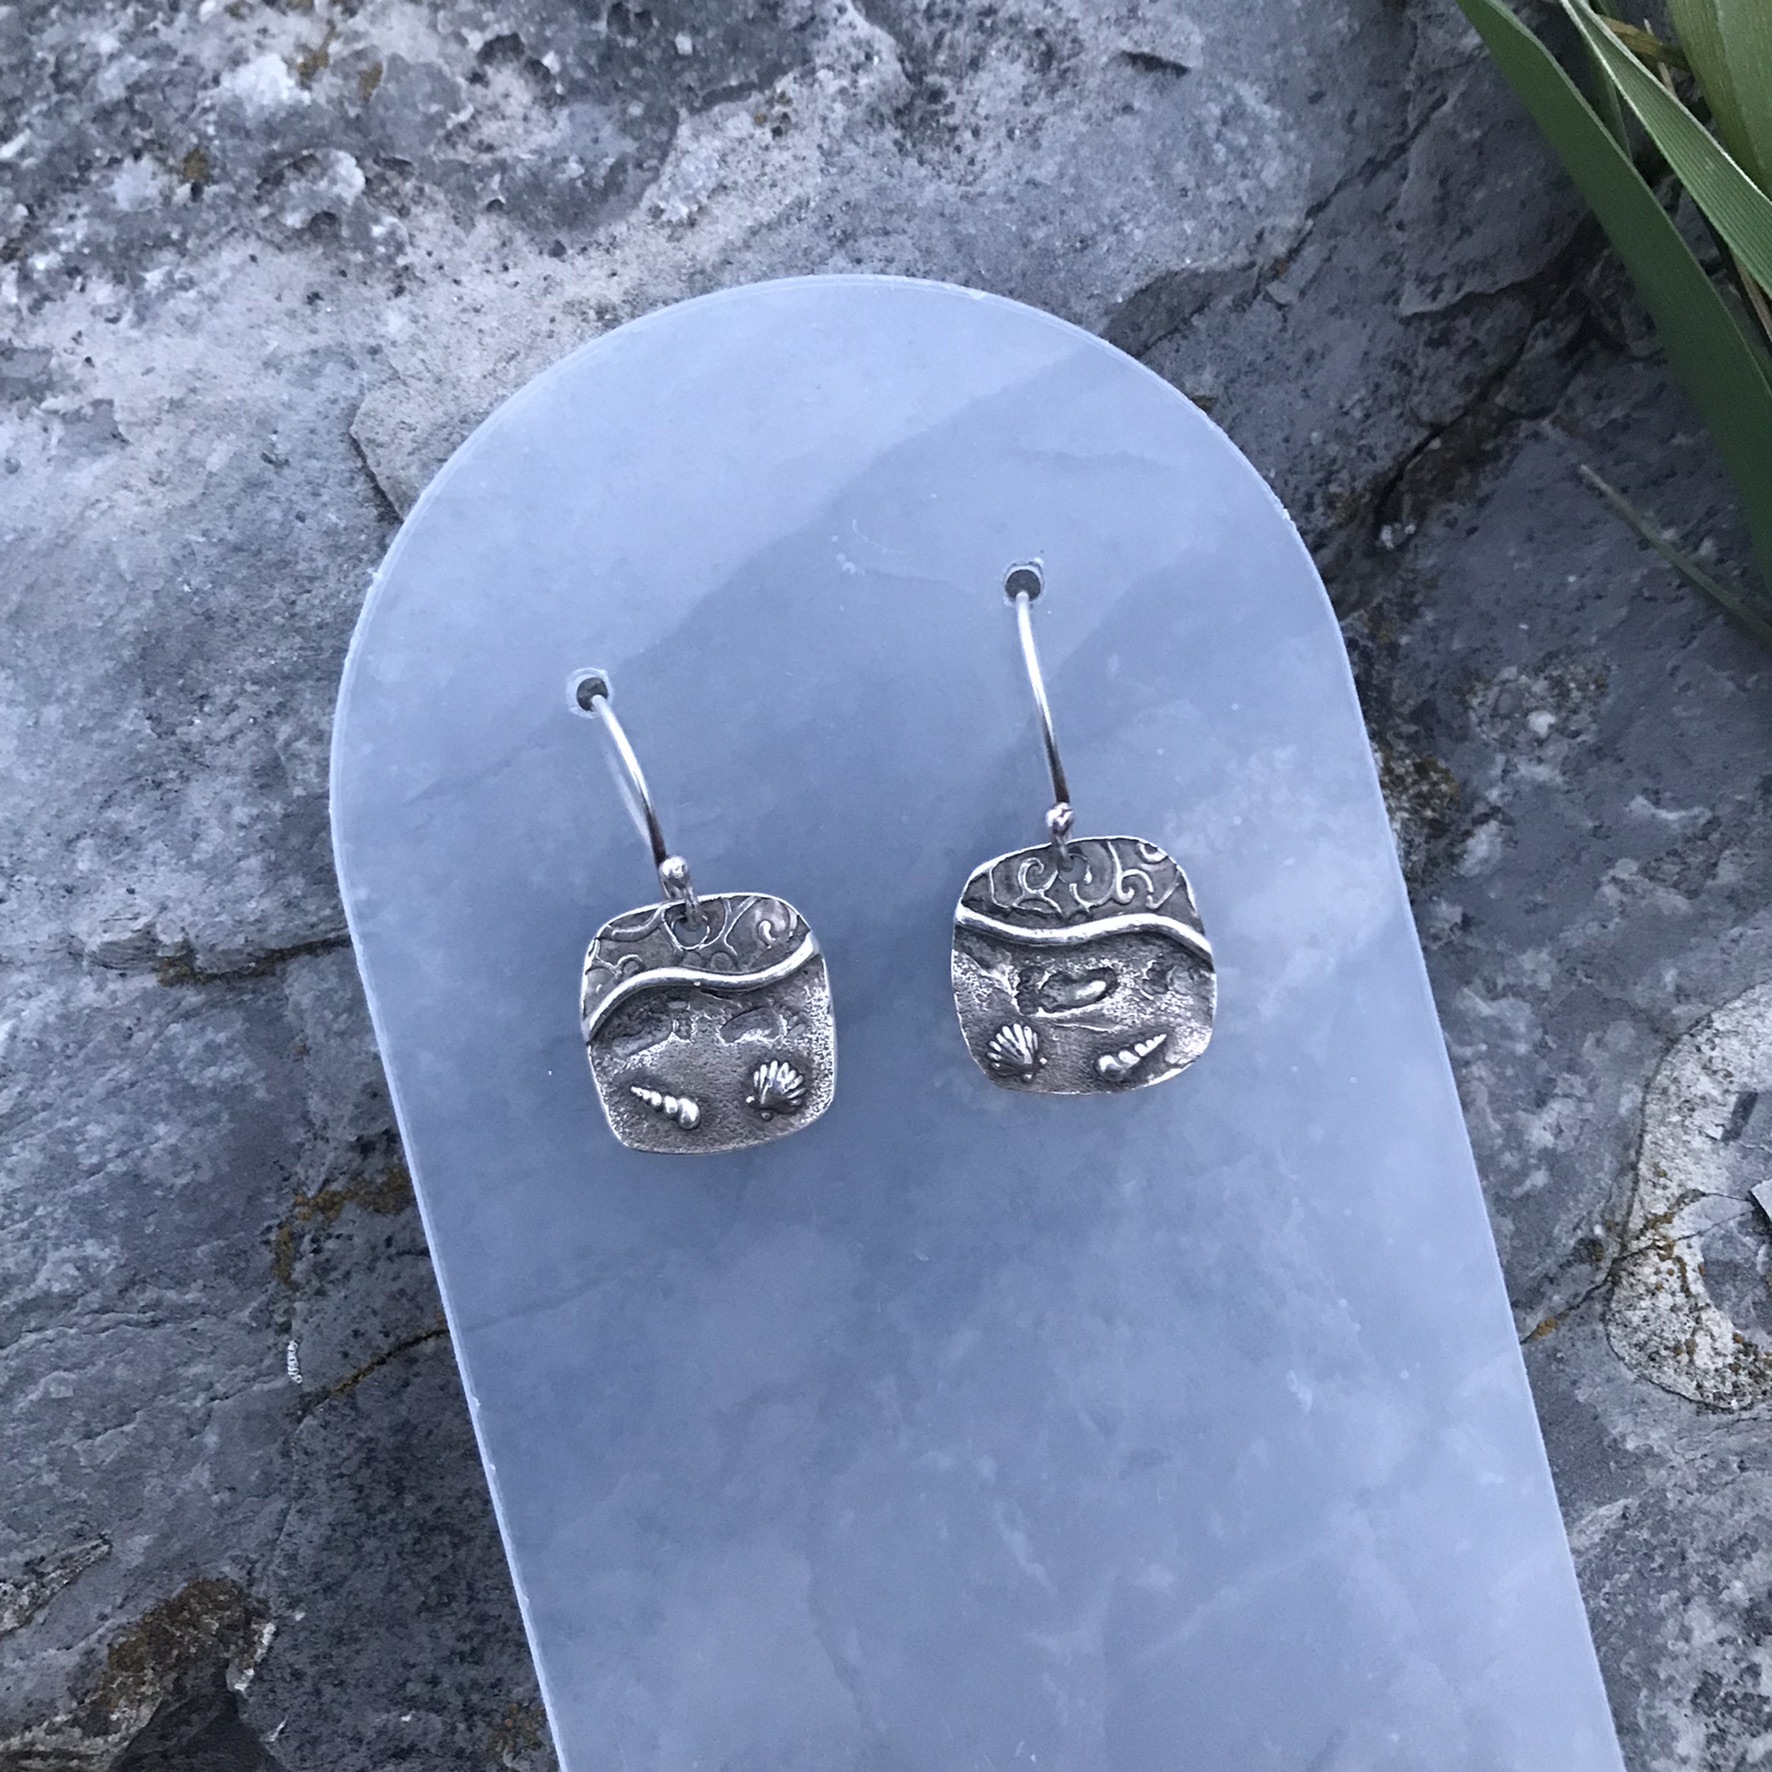 Never Alone Drop Earrings- square shaped drops created in fine silver metal clay and showing a beach scene with water, shells and footprints in the sand with handmade sterling silver earwires on earring display with rock backdrop